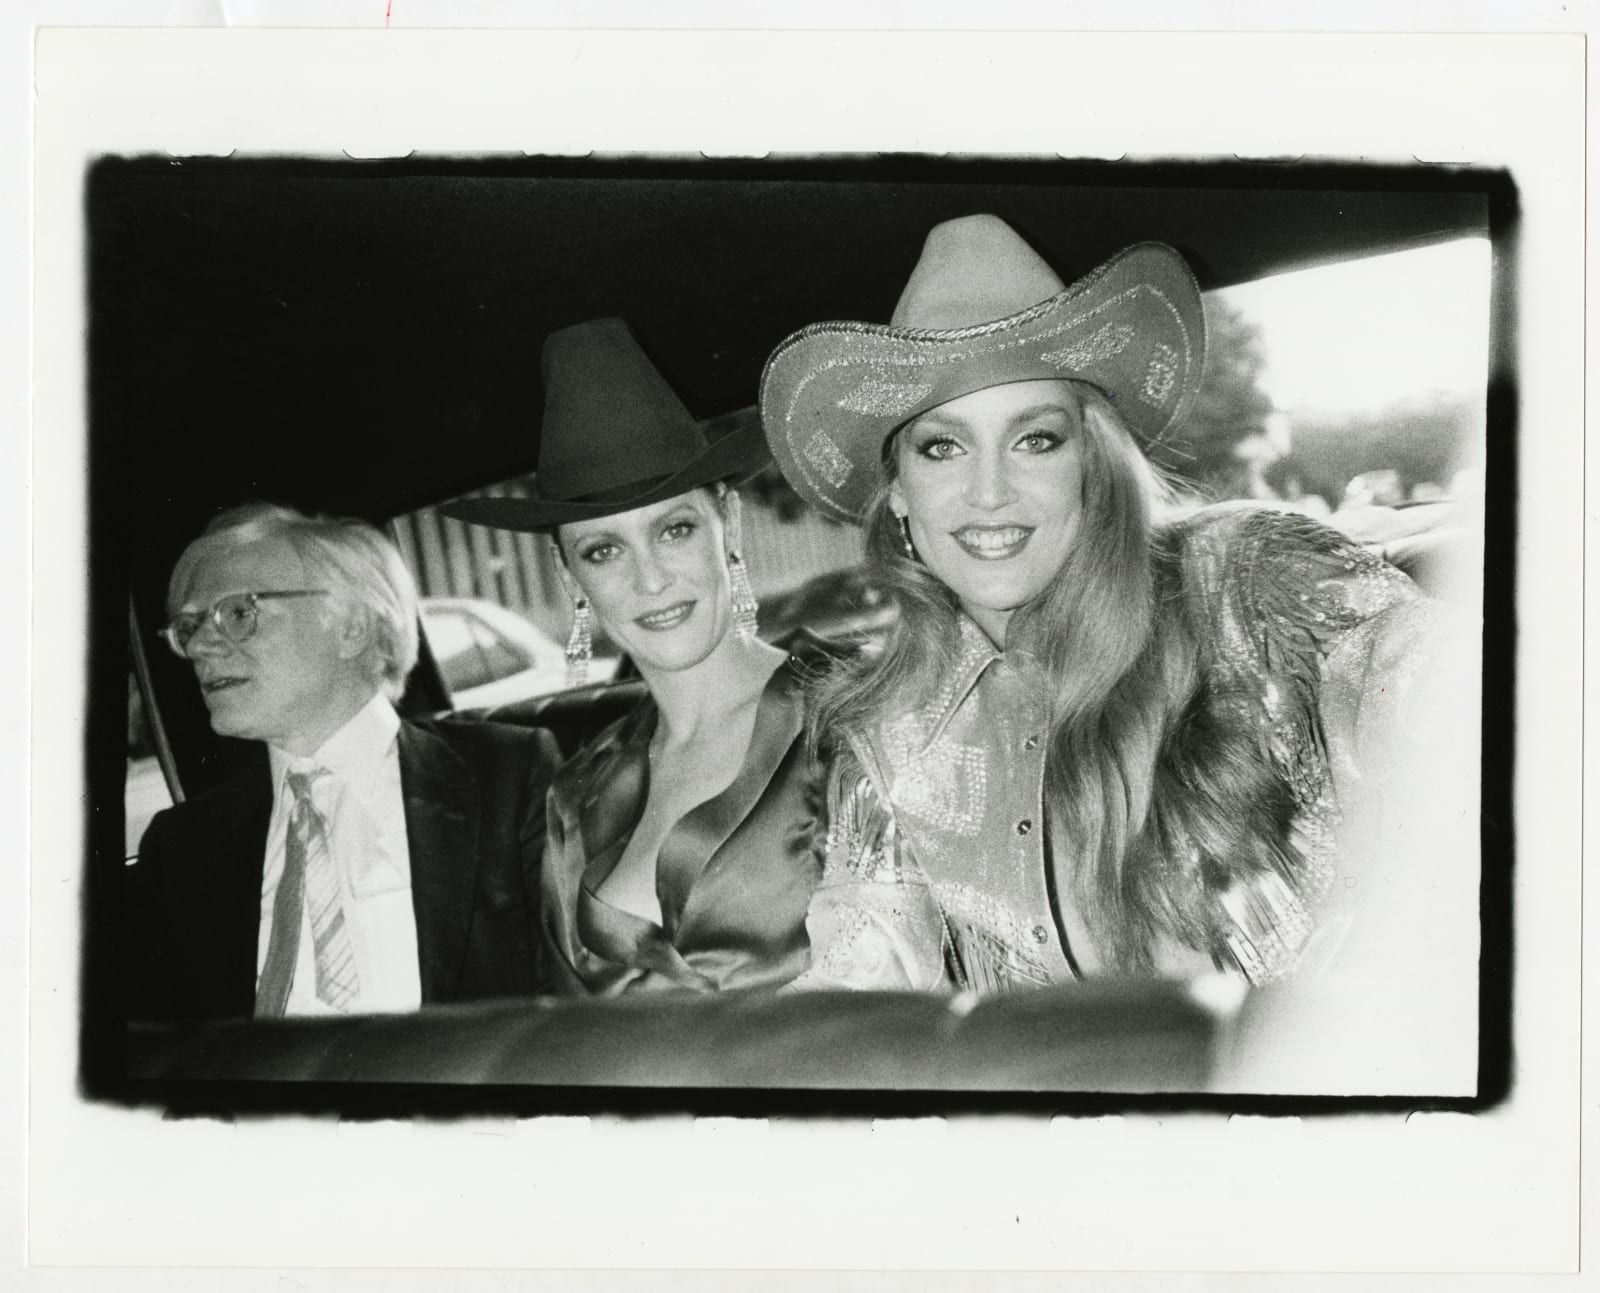 <a href="/content/feature/4399/detail/image43107/" class="pageload-link-type-popup-enabled-content"><p><span class="cms_size_1"><em>Andy, Cindy and Jerry Hall, Houston,</em> 1980</span><br /><span class="cms_size_1">Vintage gelatin silver print</span><br /><span class="cms_size_1">20.3 x 25.4 cm (8 x 10 in)</span></p></a>